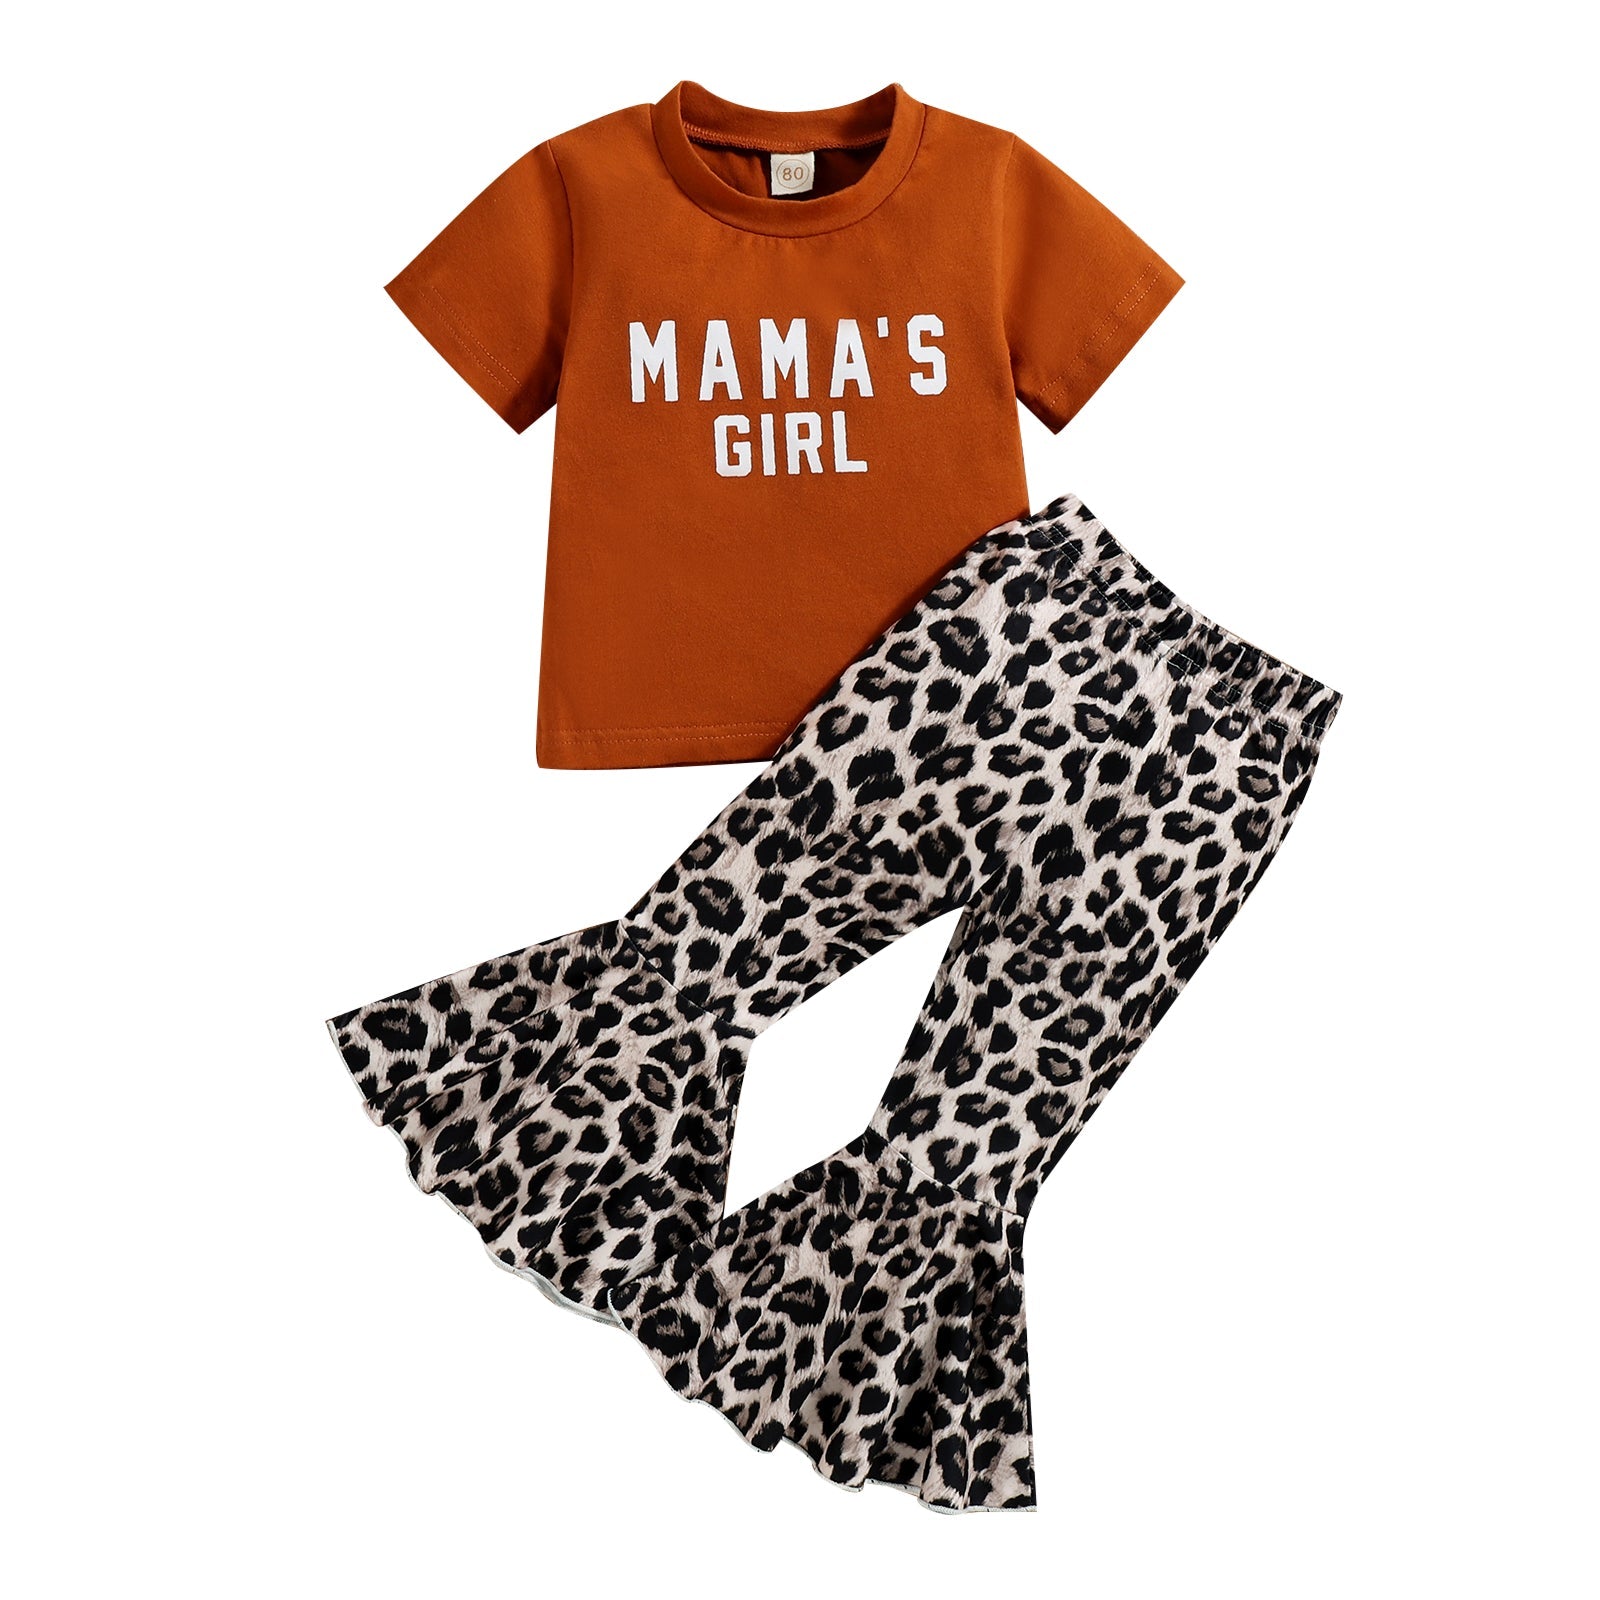 MAMA's Girl Suits.